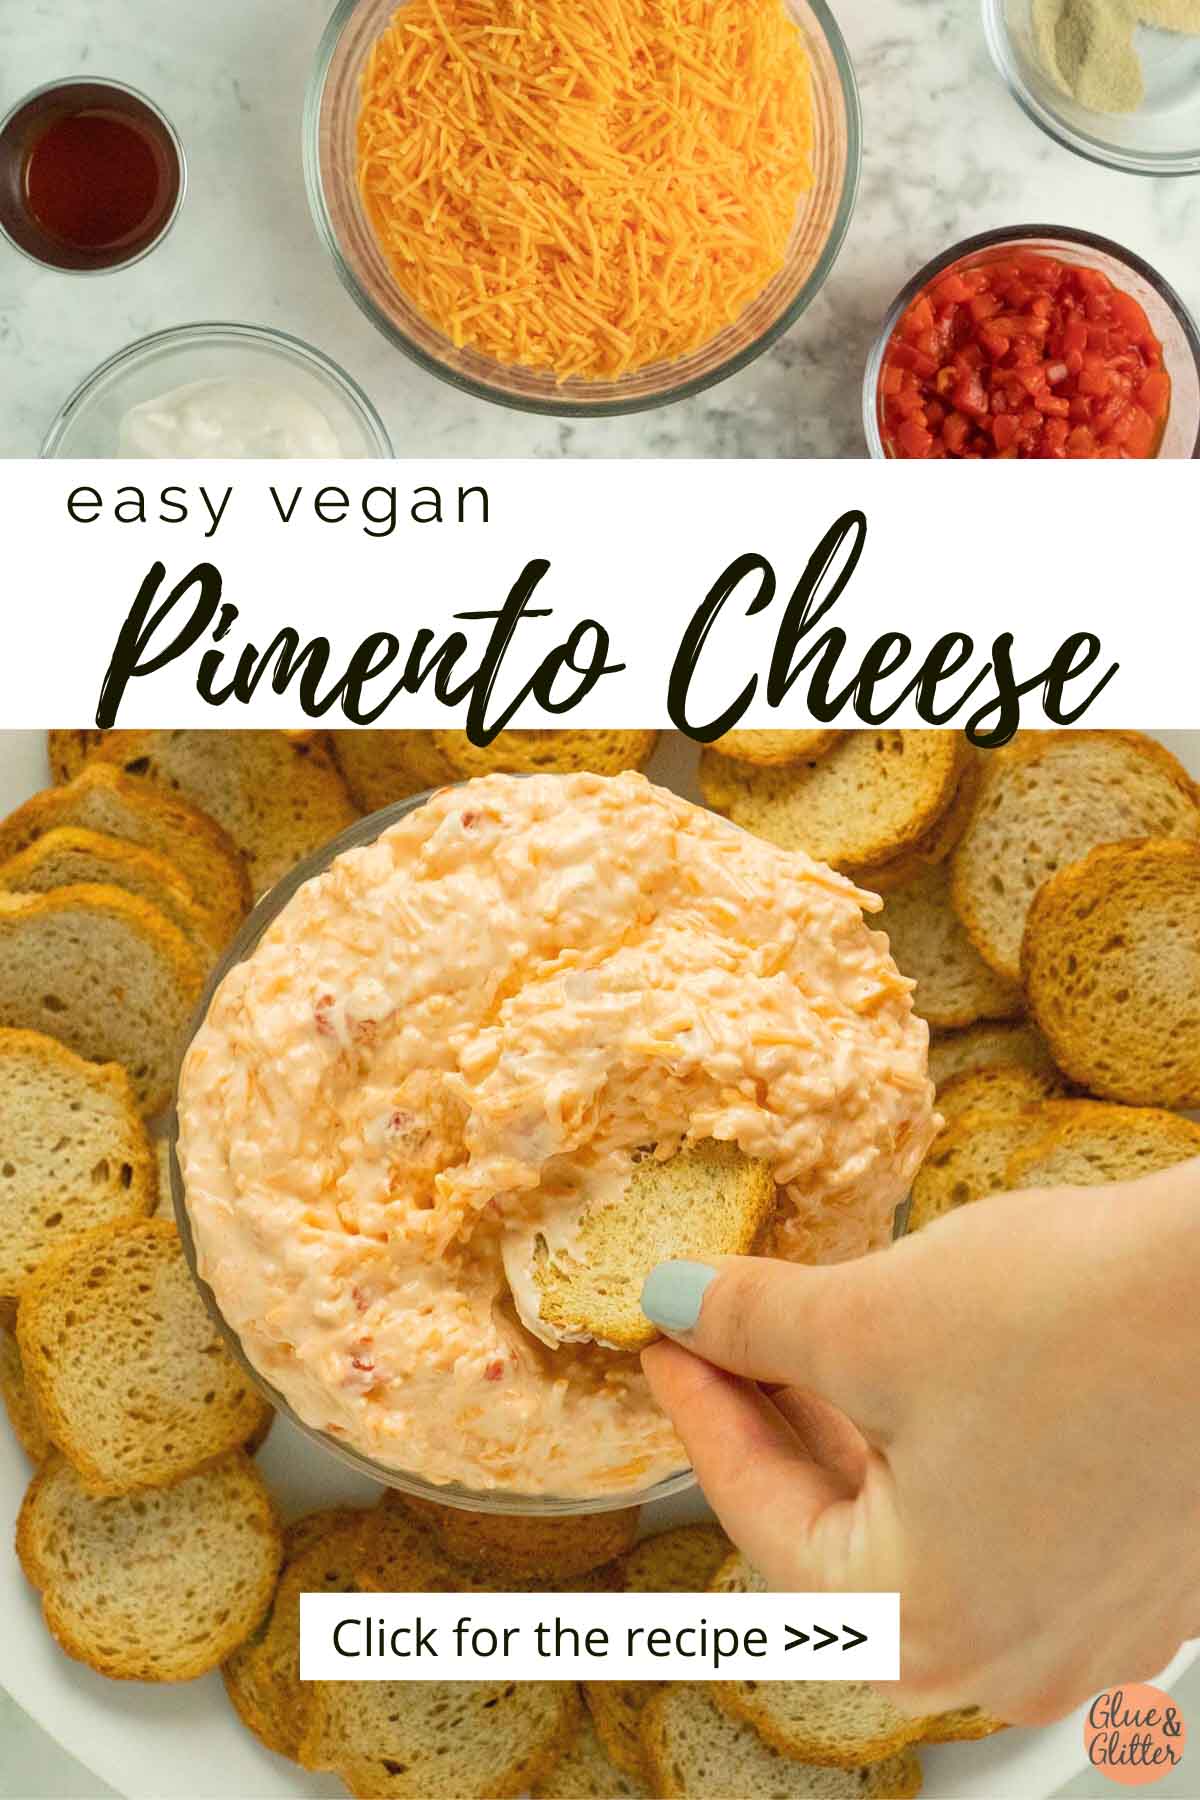 hand dipping a cracker into a serving bowl of vegan pimento cheese